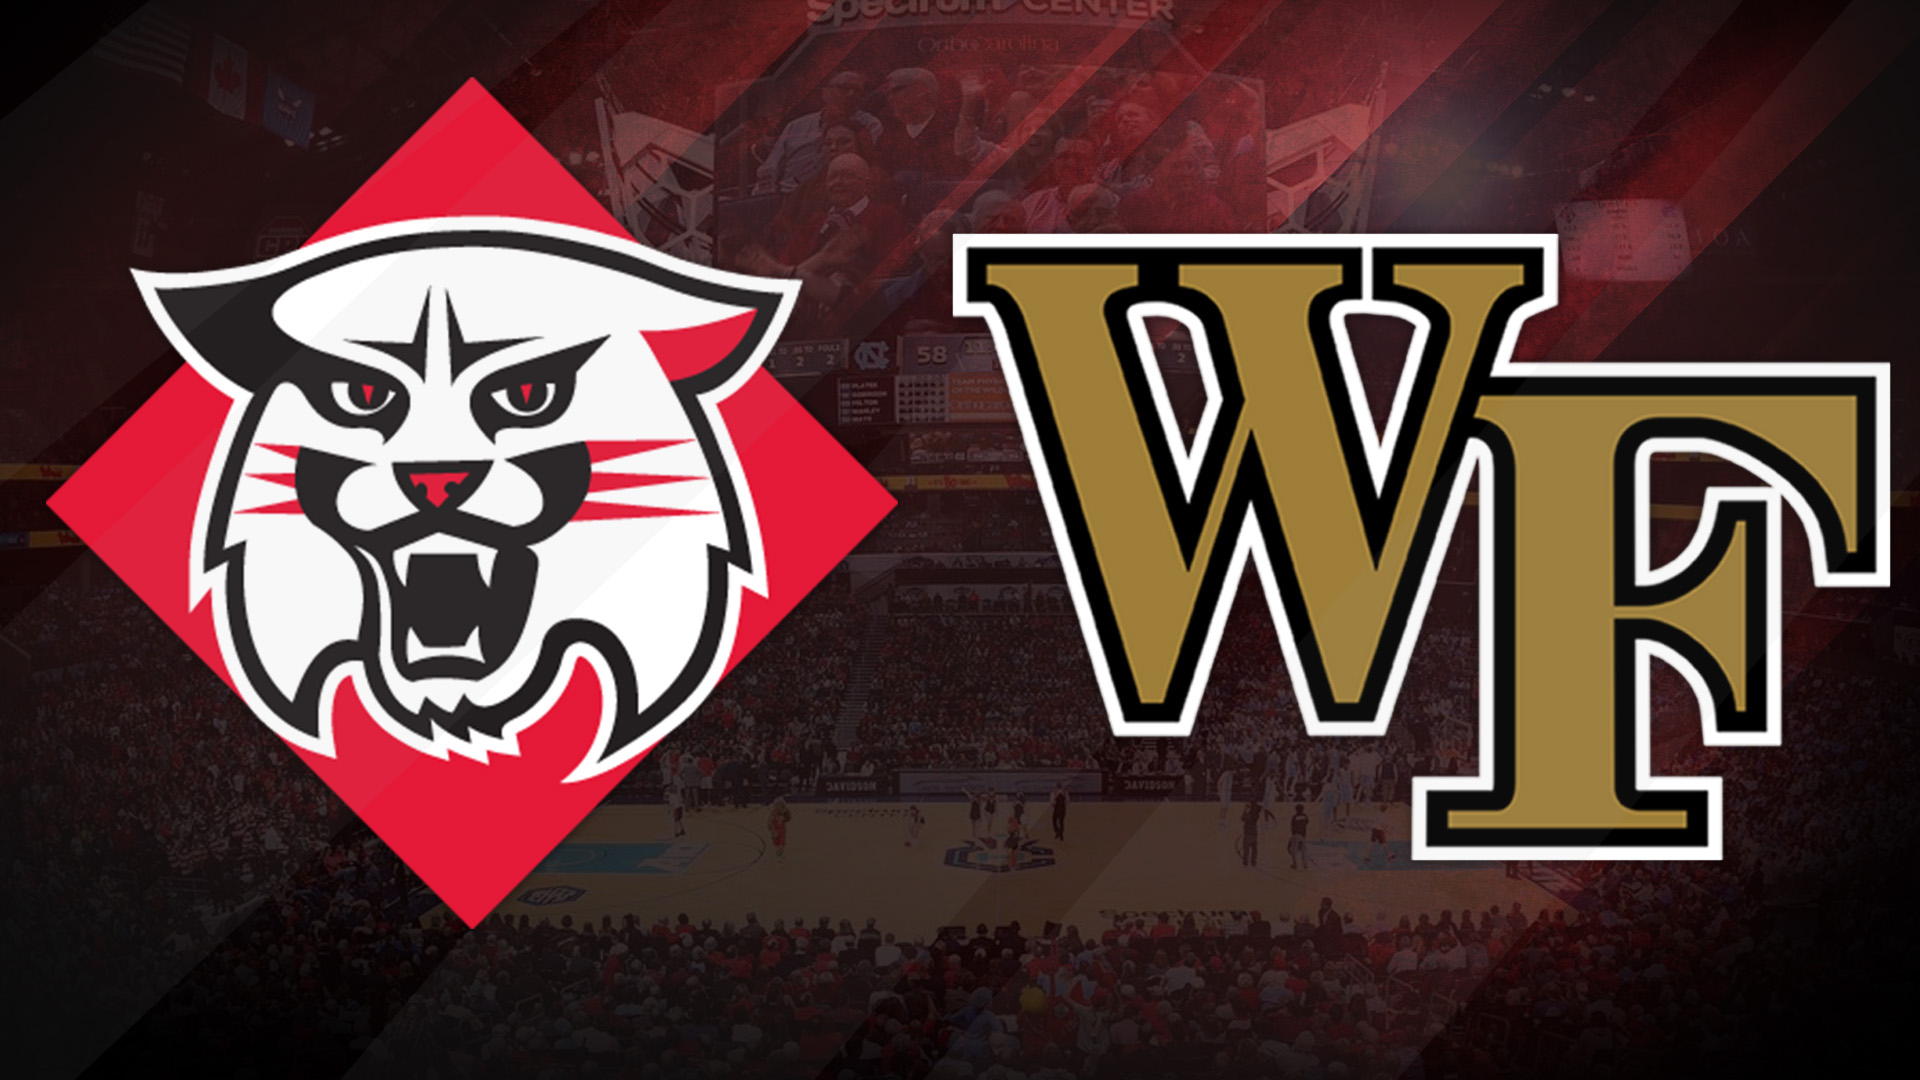 CSJ Men’s Hoops Preview, Davidson at Wake Forest, How to Watch and Fearless Prediction